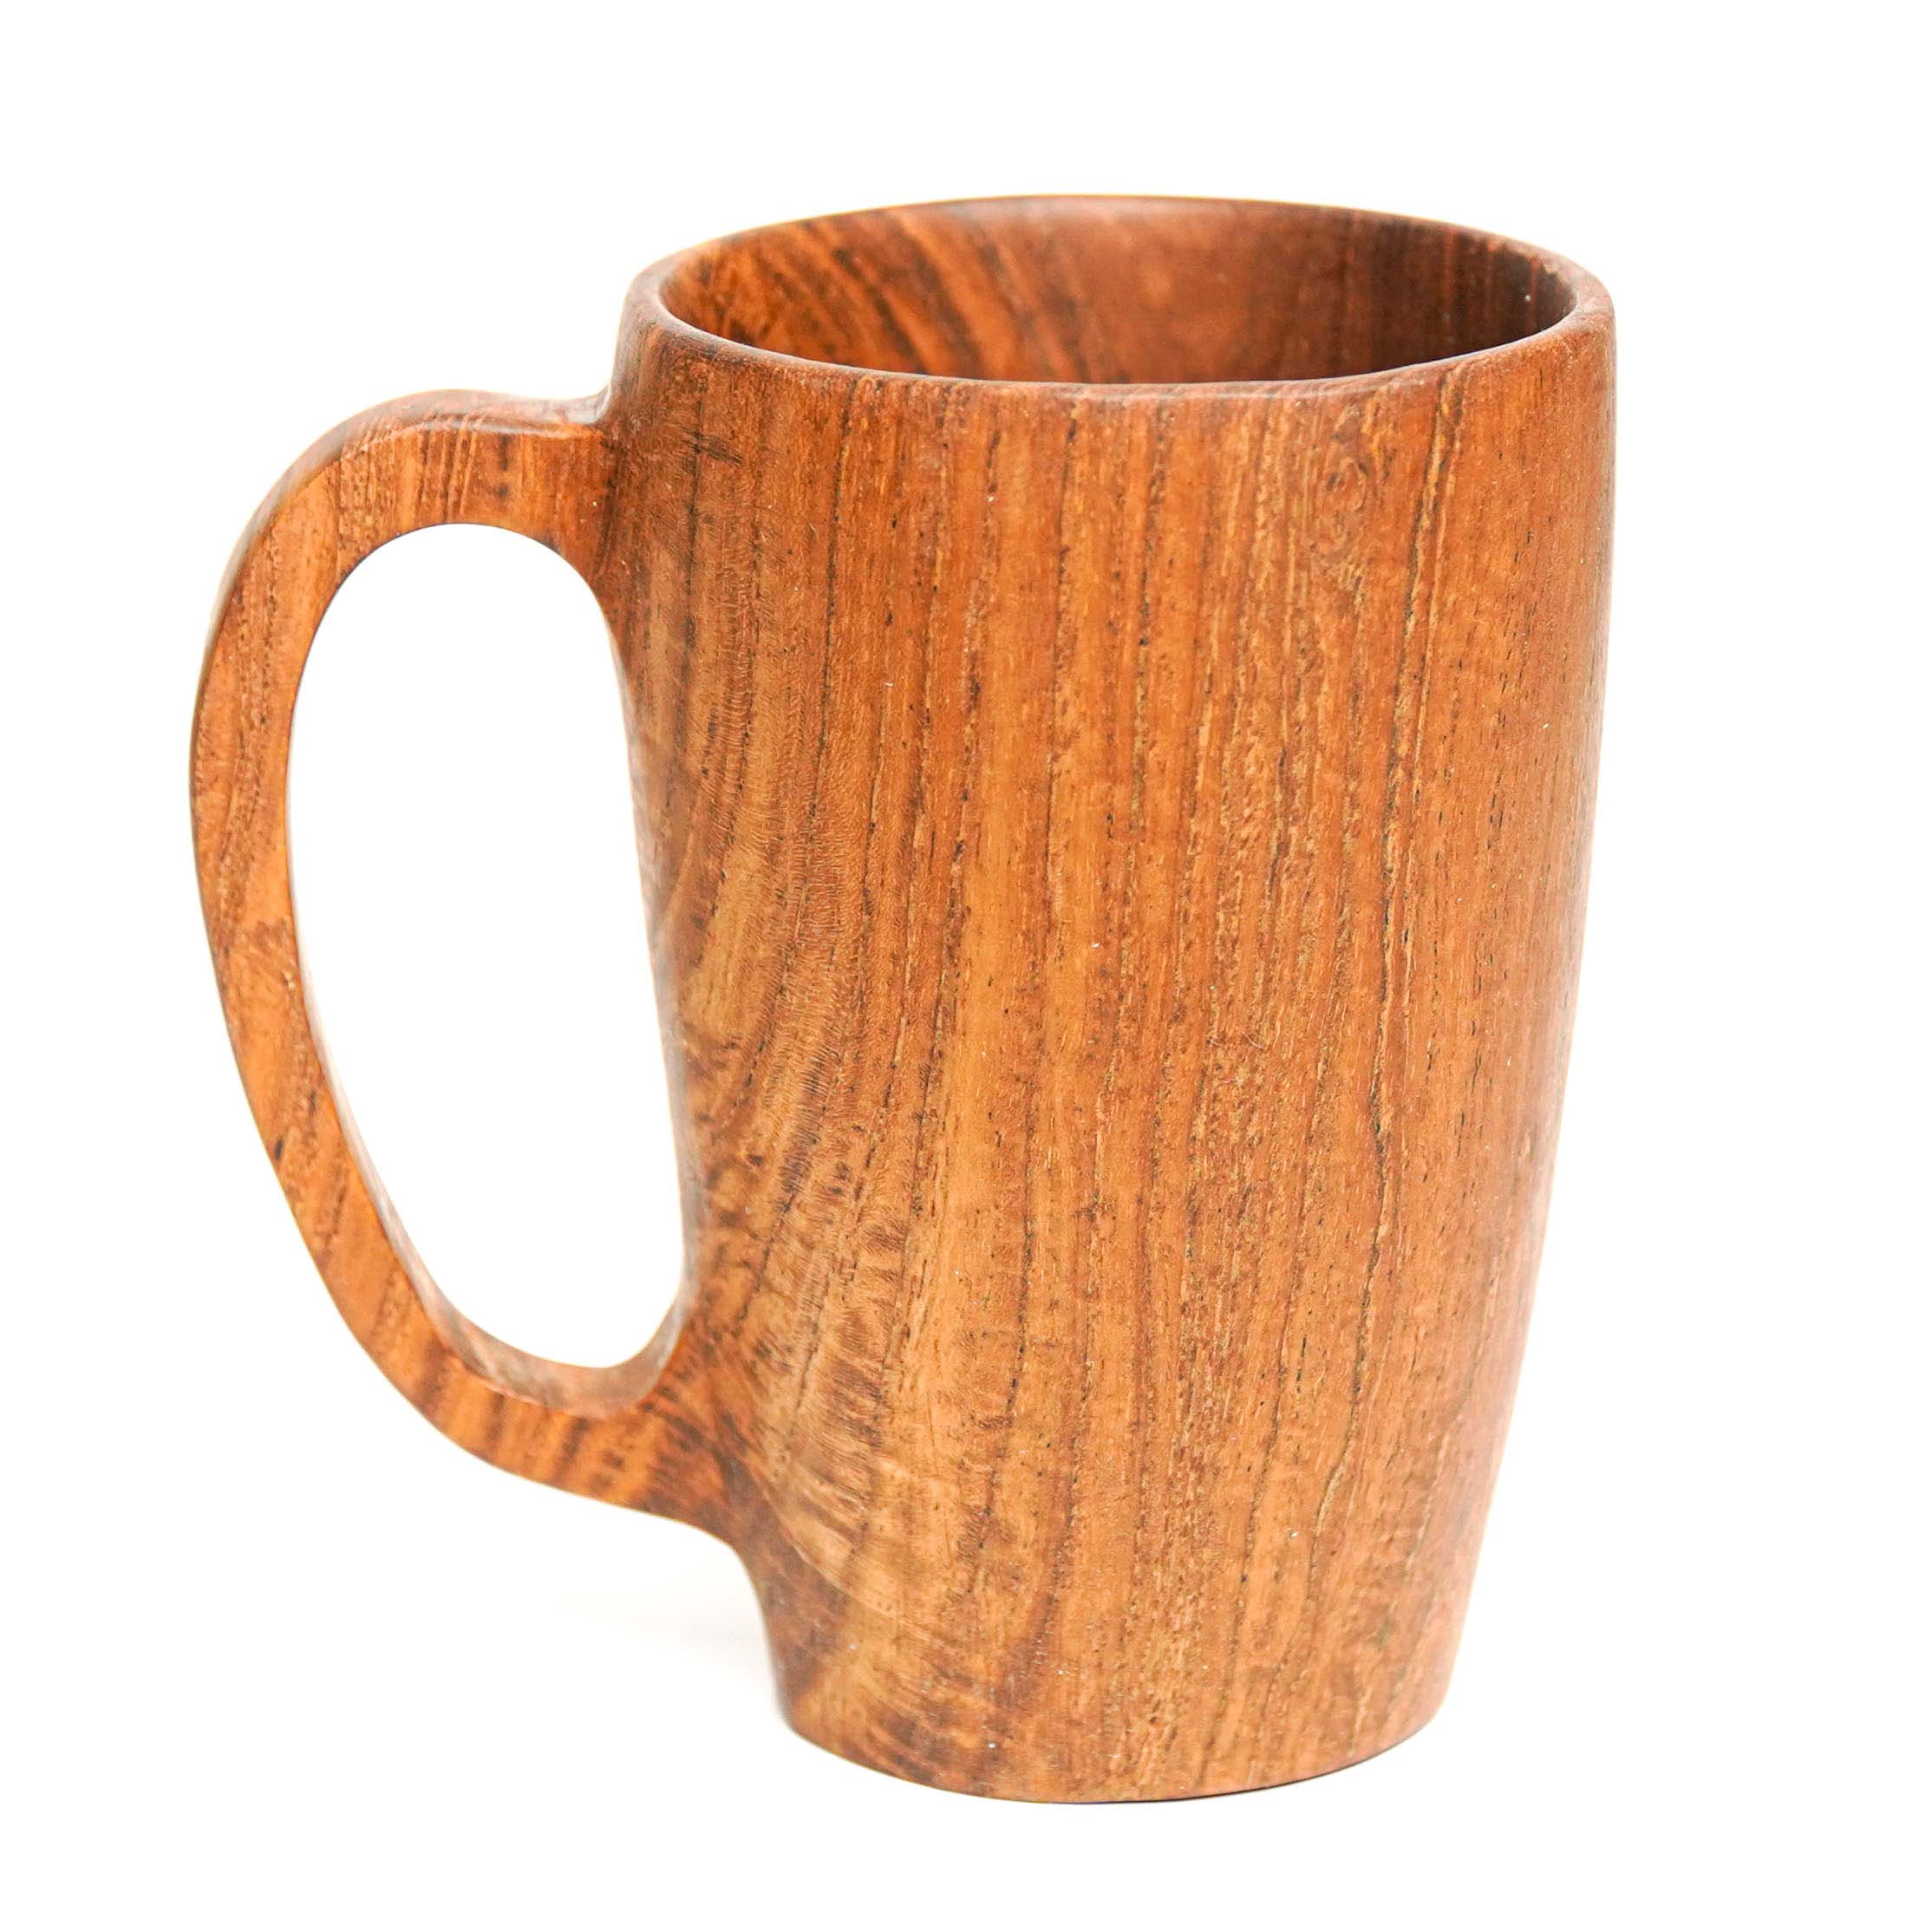 Teak Wood Coffee Cup Tea Cup Natural Wood Smooth Caffeine Addict Present  Drink Nature With Our Handcrafted Wooden Coffee Set 